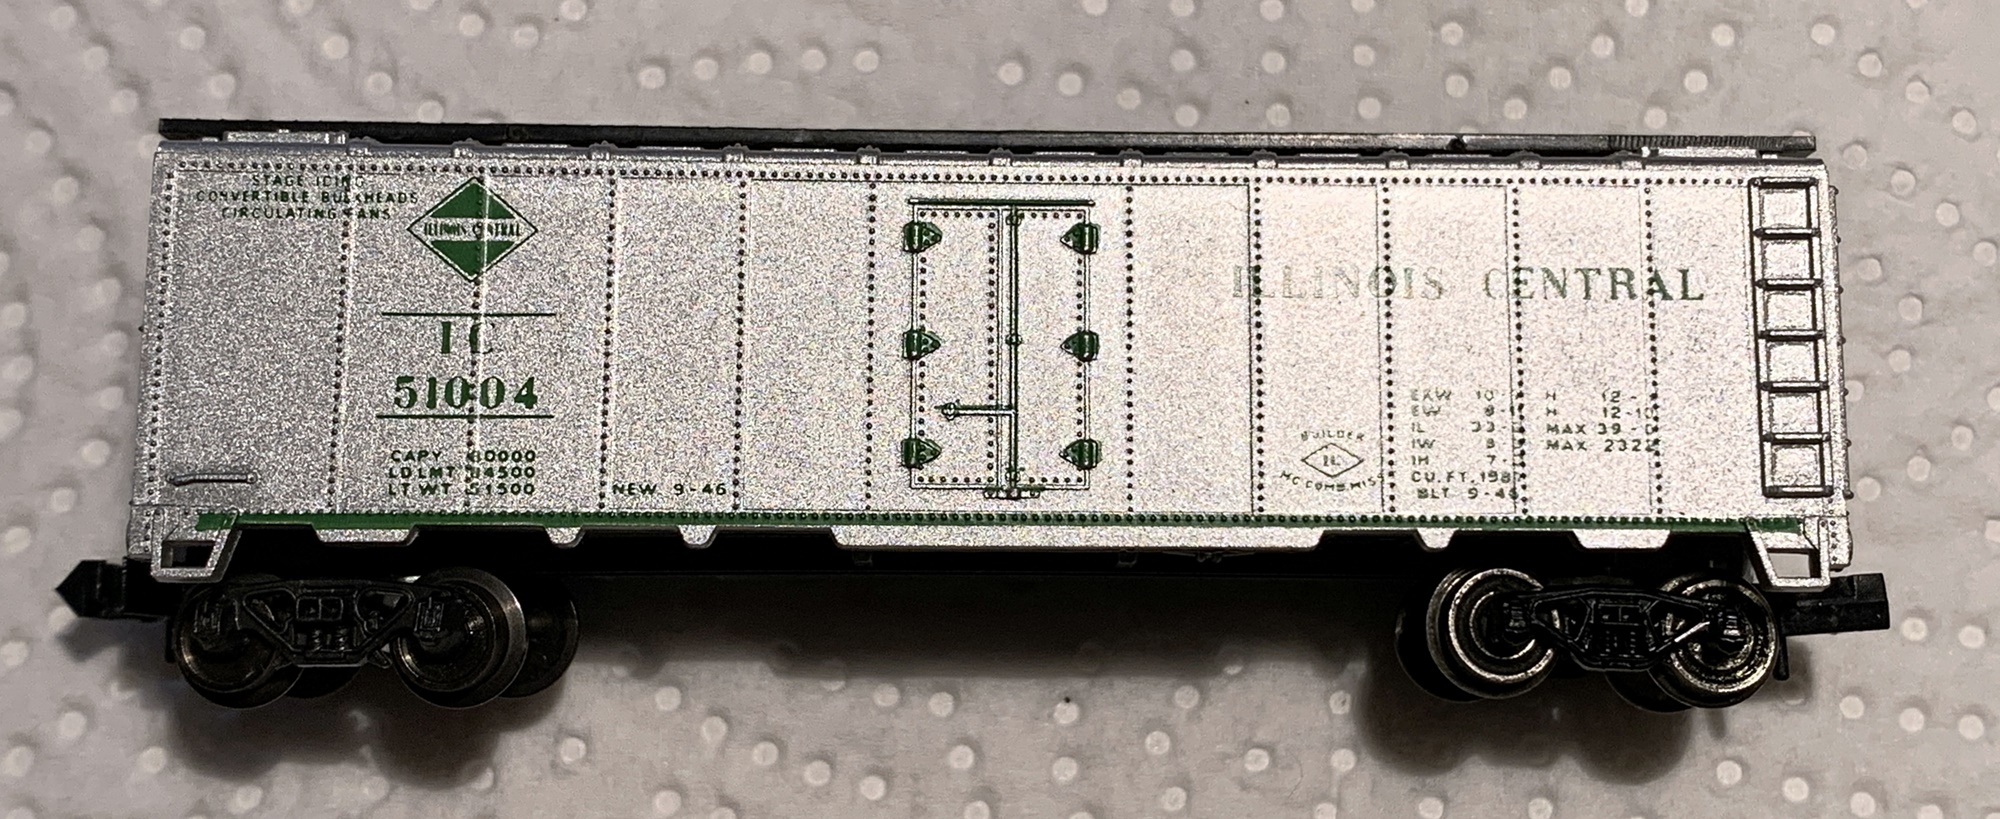 N Scale - Arnold - 0520-B - Reefer, 40 Foot, Steel - Illinois Central - 51004